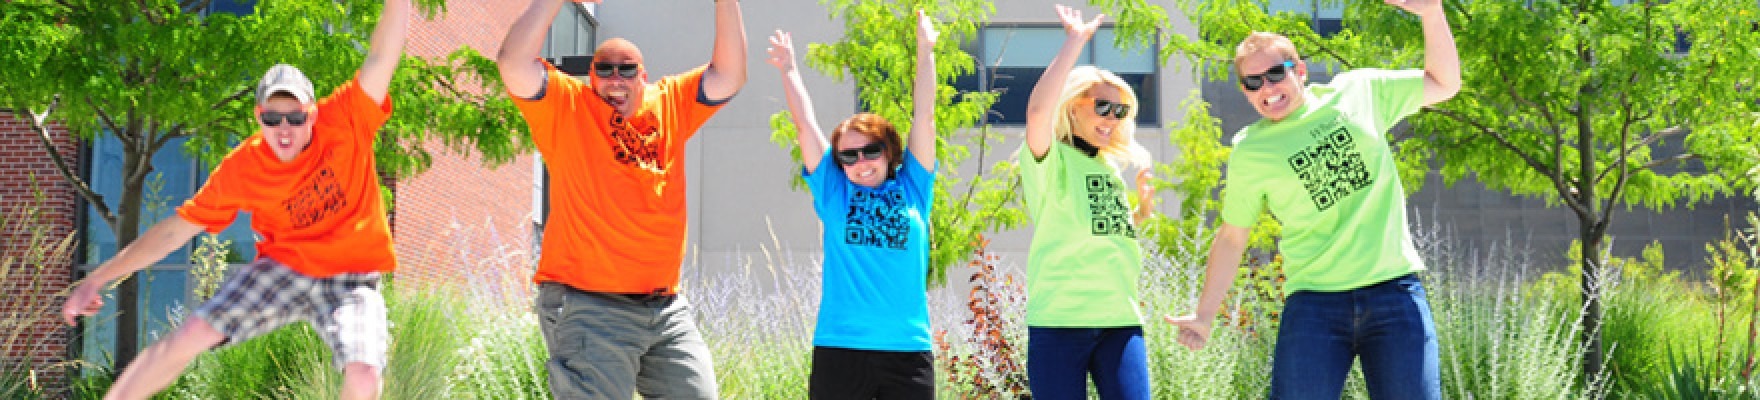 five street team members jumping while wearing brightly colored shirts